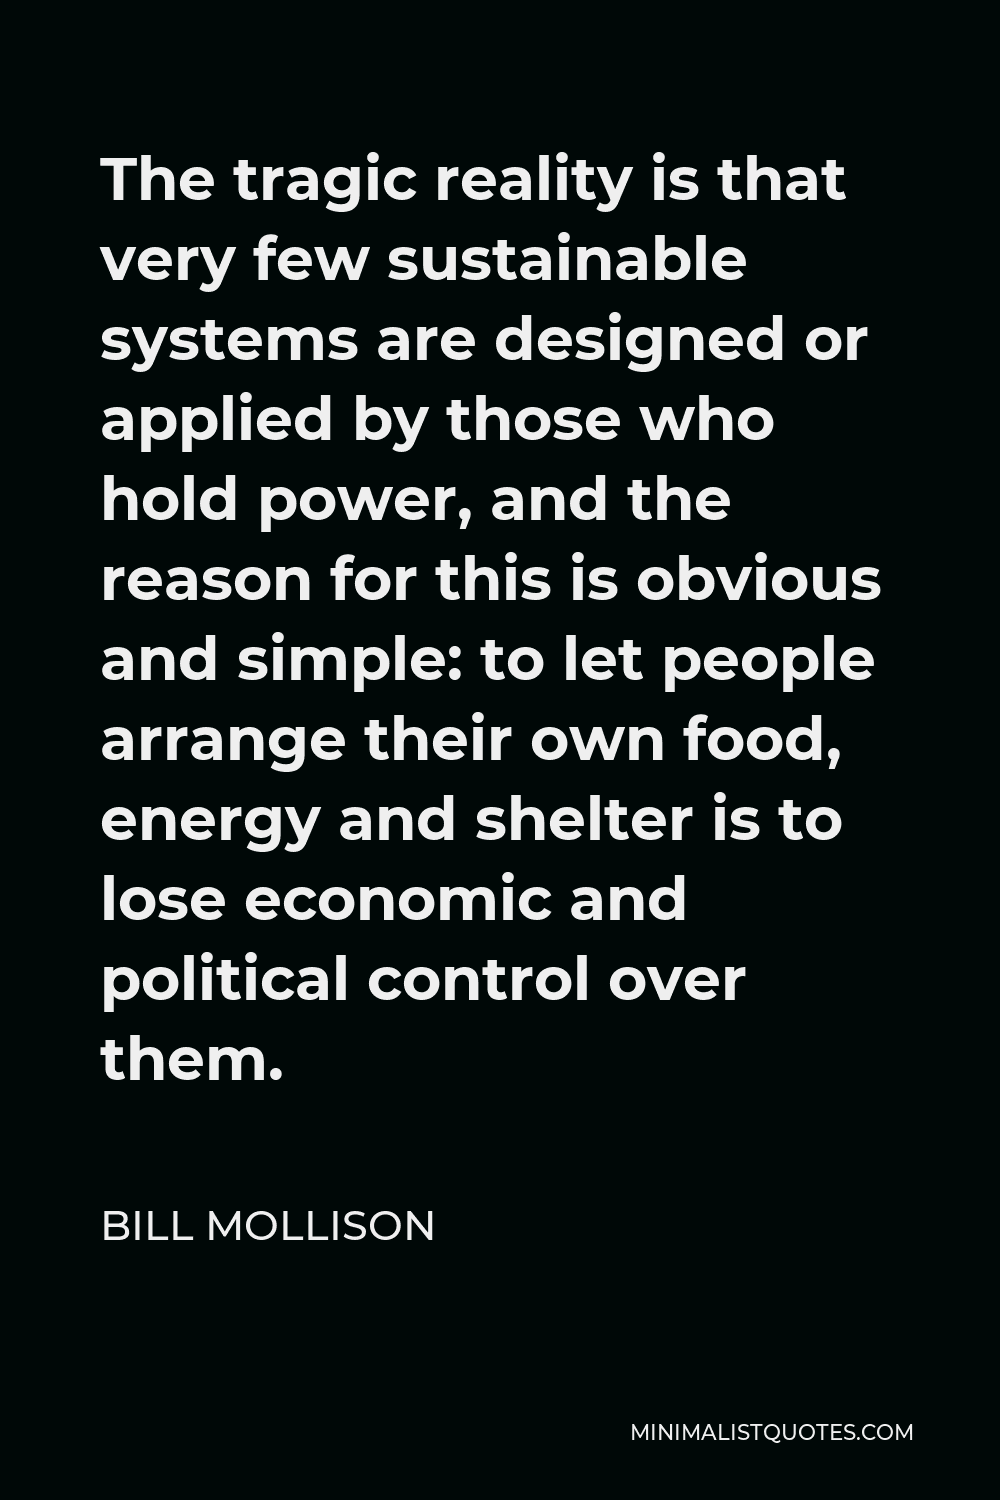 Bill Mollison Quote - The tragic reality is that very few sustainable systems are designed or applied by those who hold power, and the reason for this is obvious and simple: to let people arrange their own food, energy and shelter is to lose economic and political control over them.